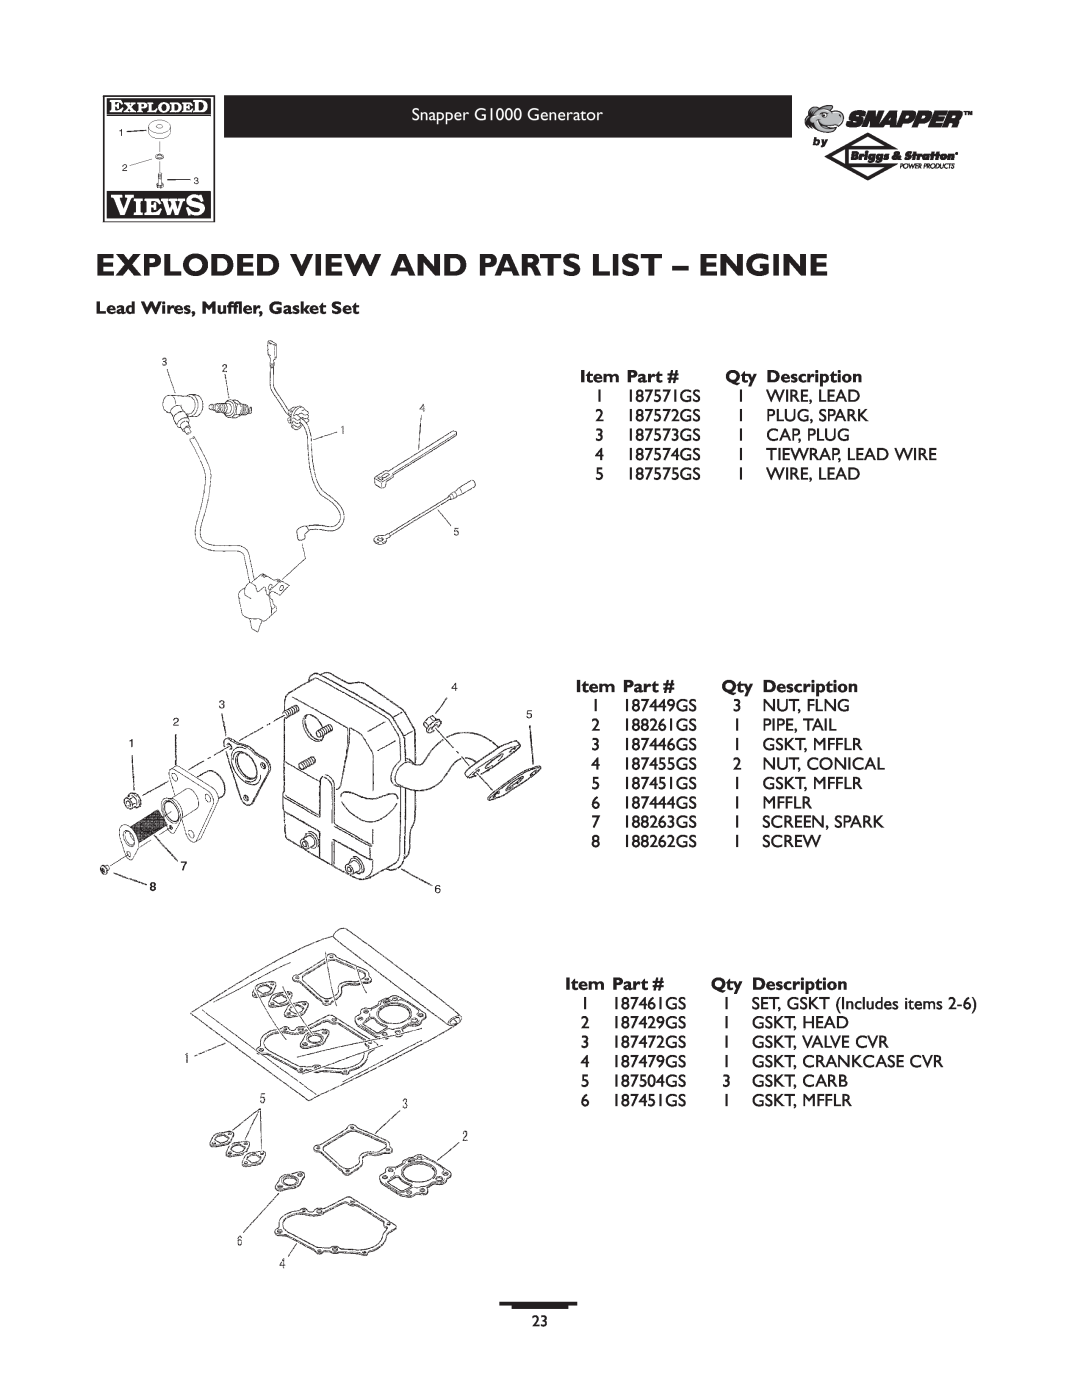 Snapper 1666-0 Exploded View And Parts List - Engine, Tiewrap, Lead Wire, Screen, Spark, SET, GSKT Includes items 